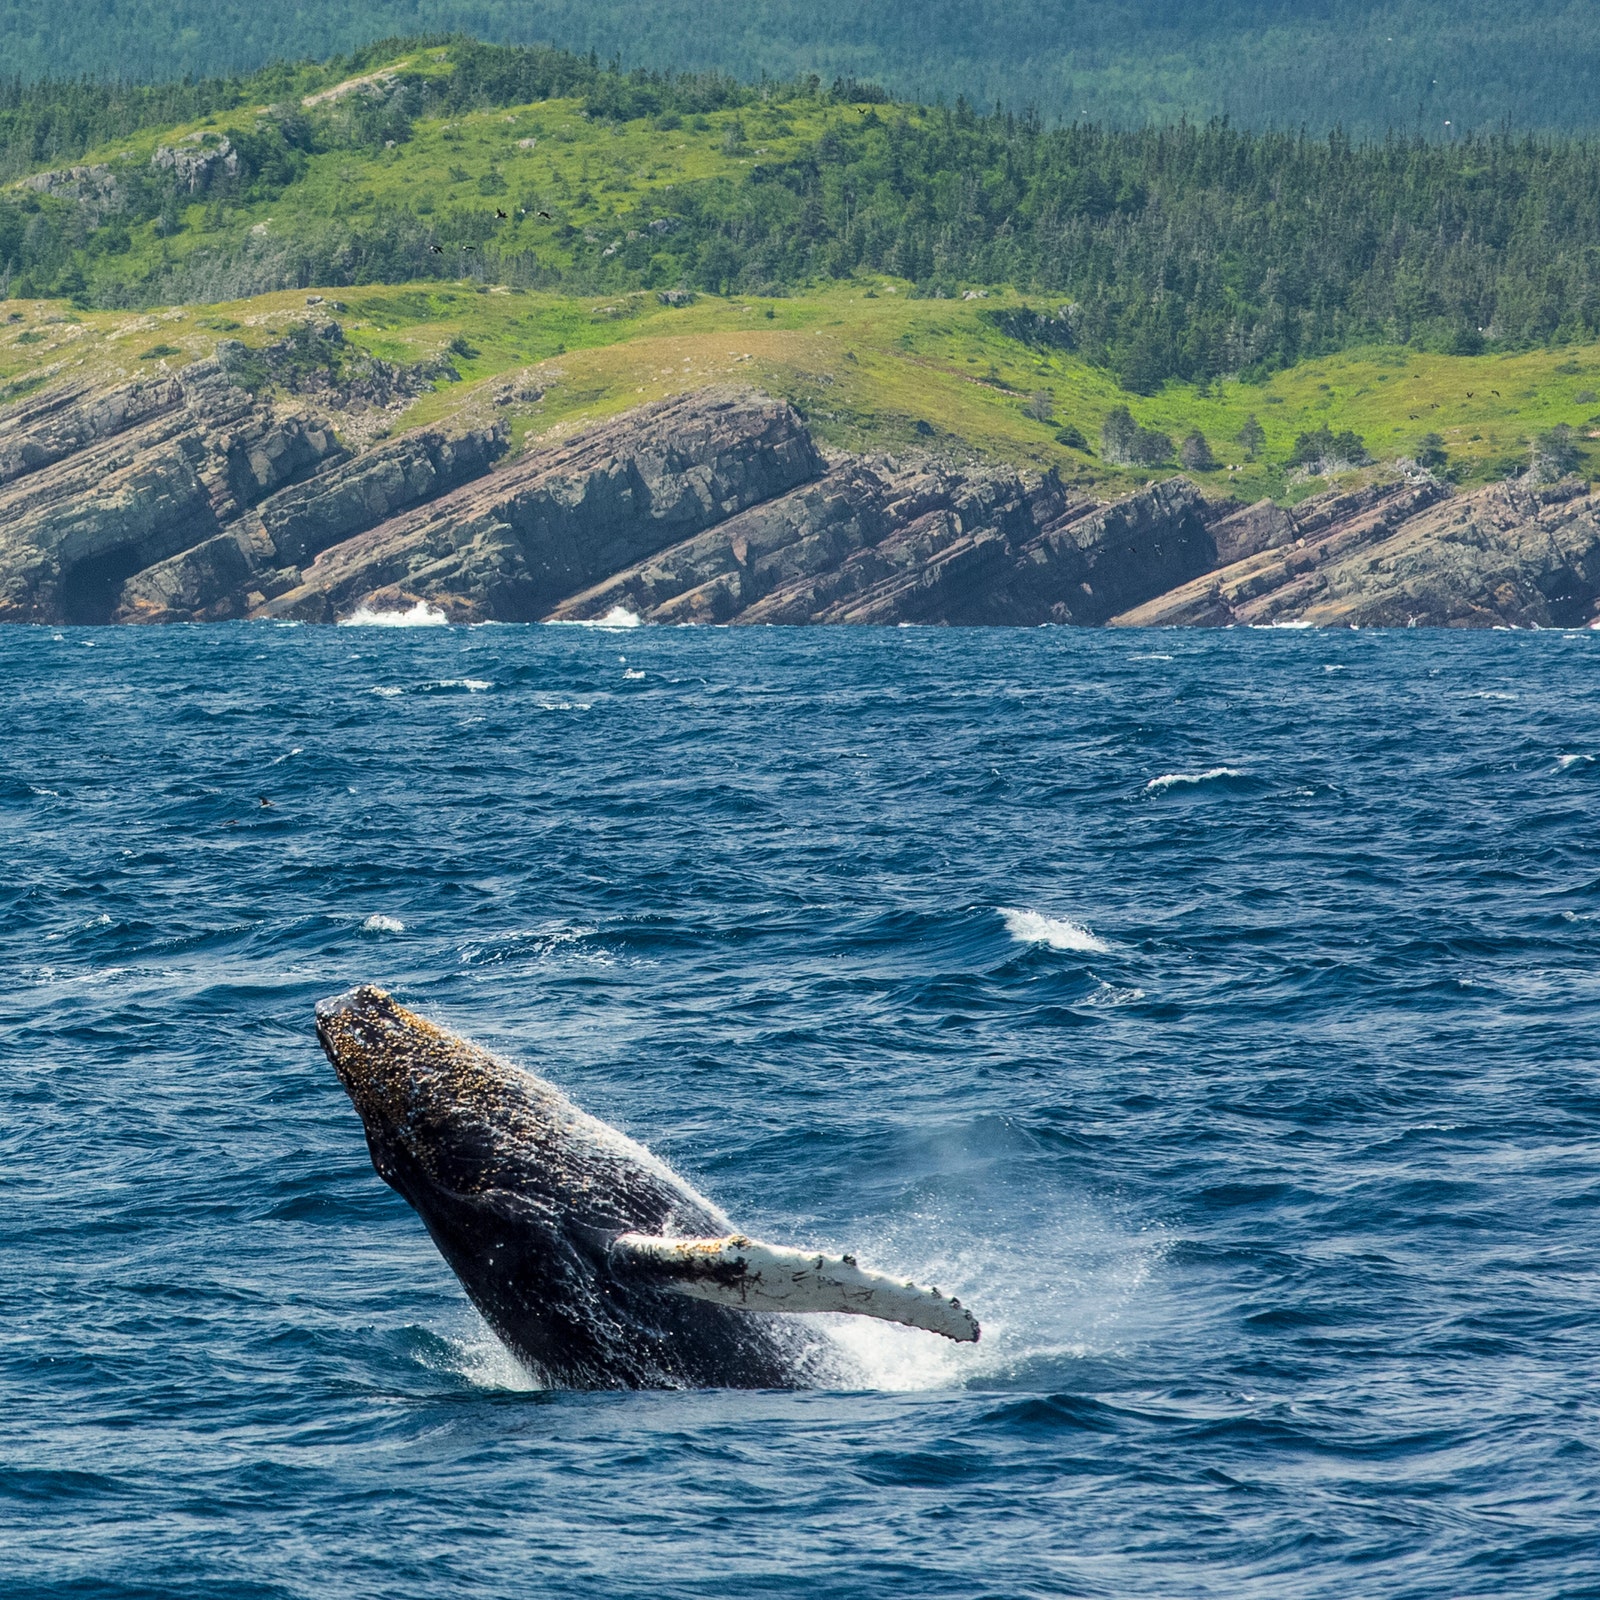 Tagging Along With Newfoundland's Resident Whale Whisperer